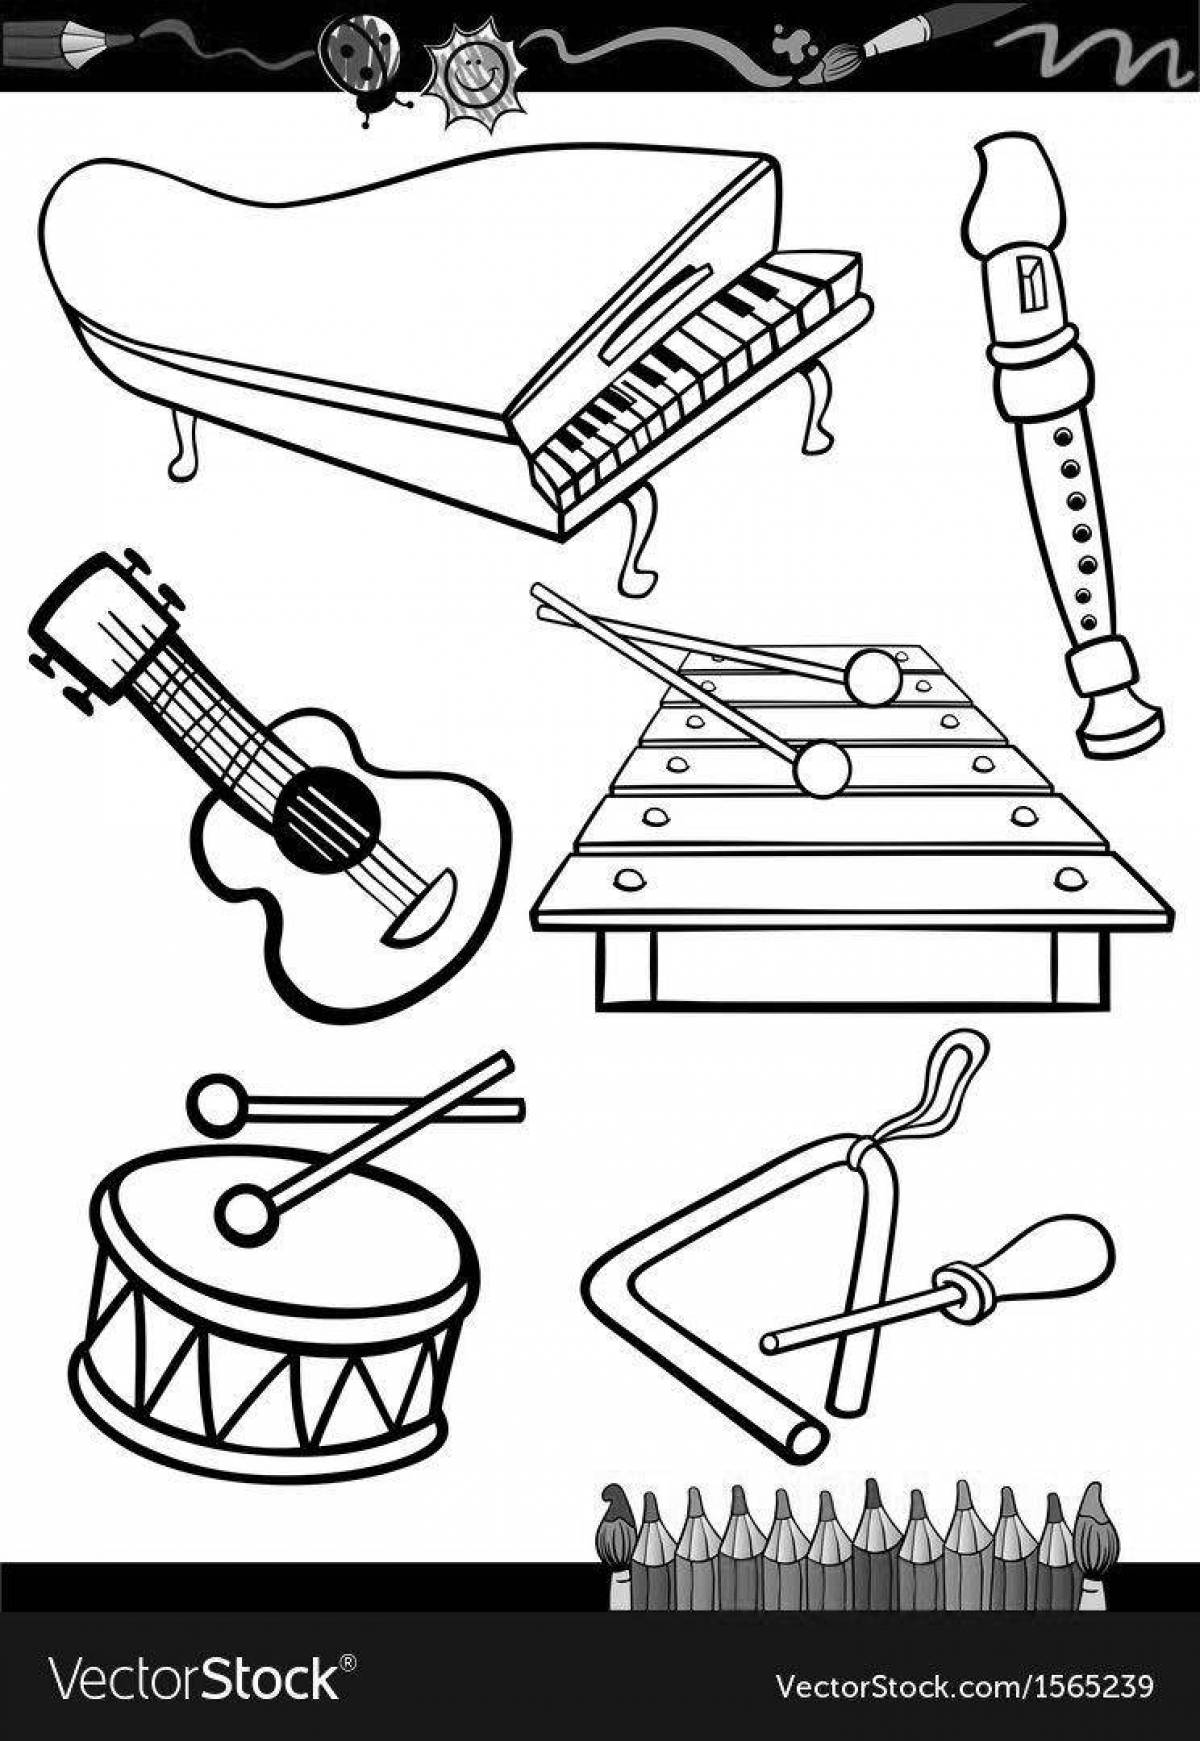 Fascinating folk musical instruments coloring book for children